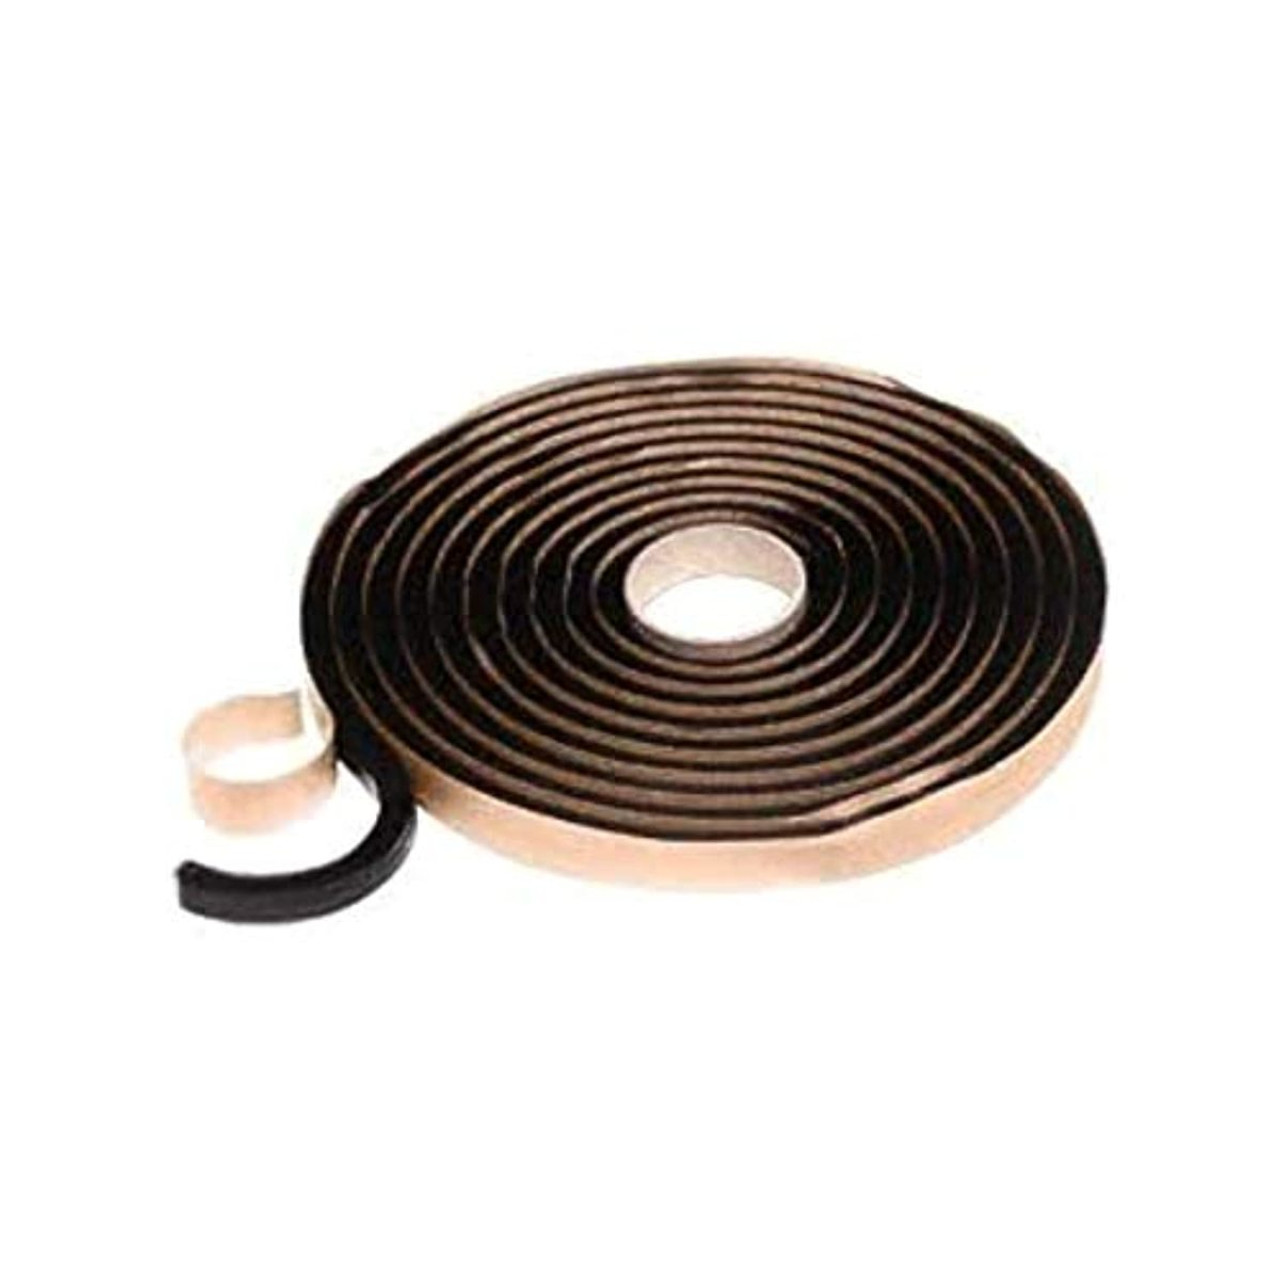 3/8" x 10' Round Butyl Tape Roll Auto Glass Adhesive Soft Seal